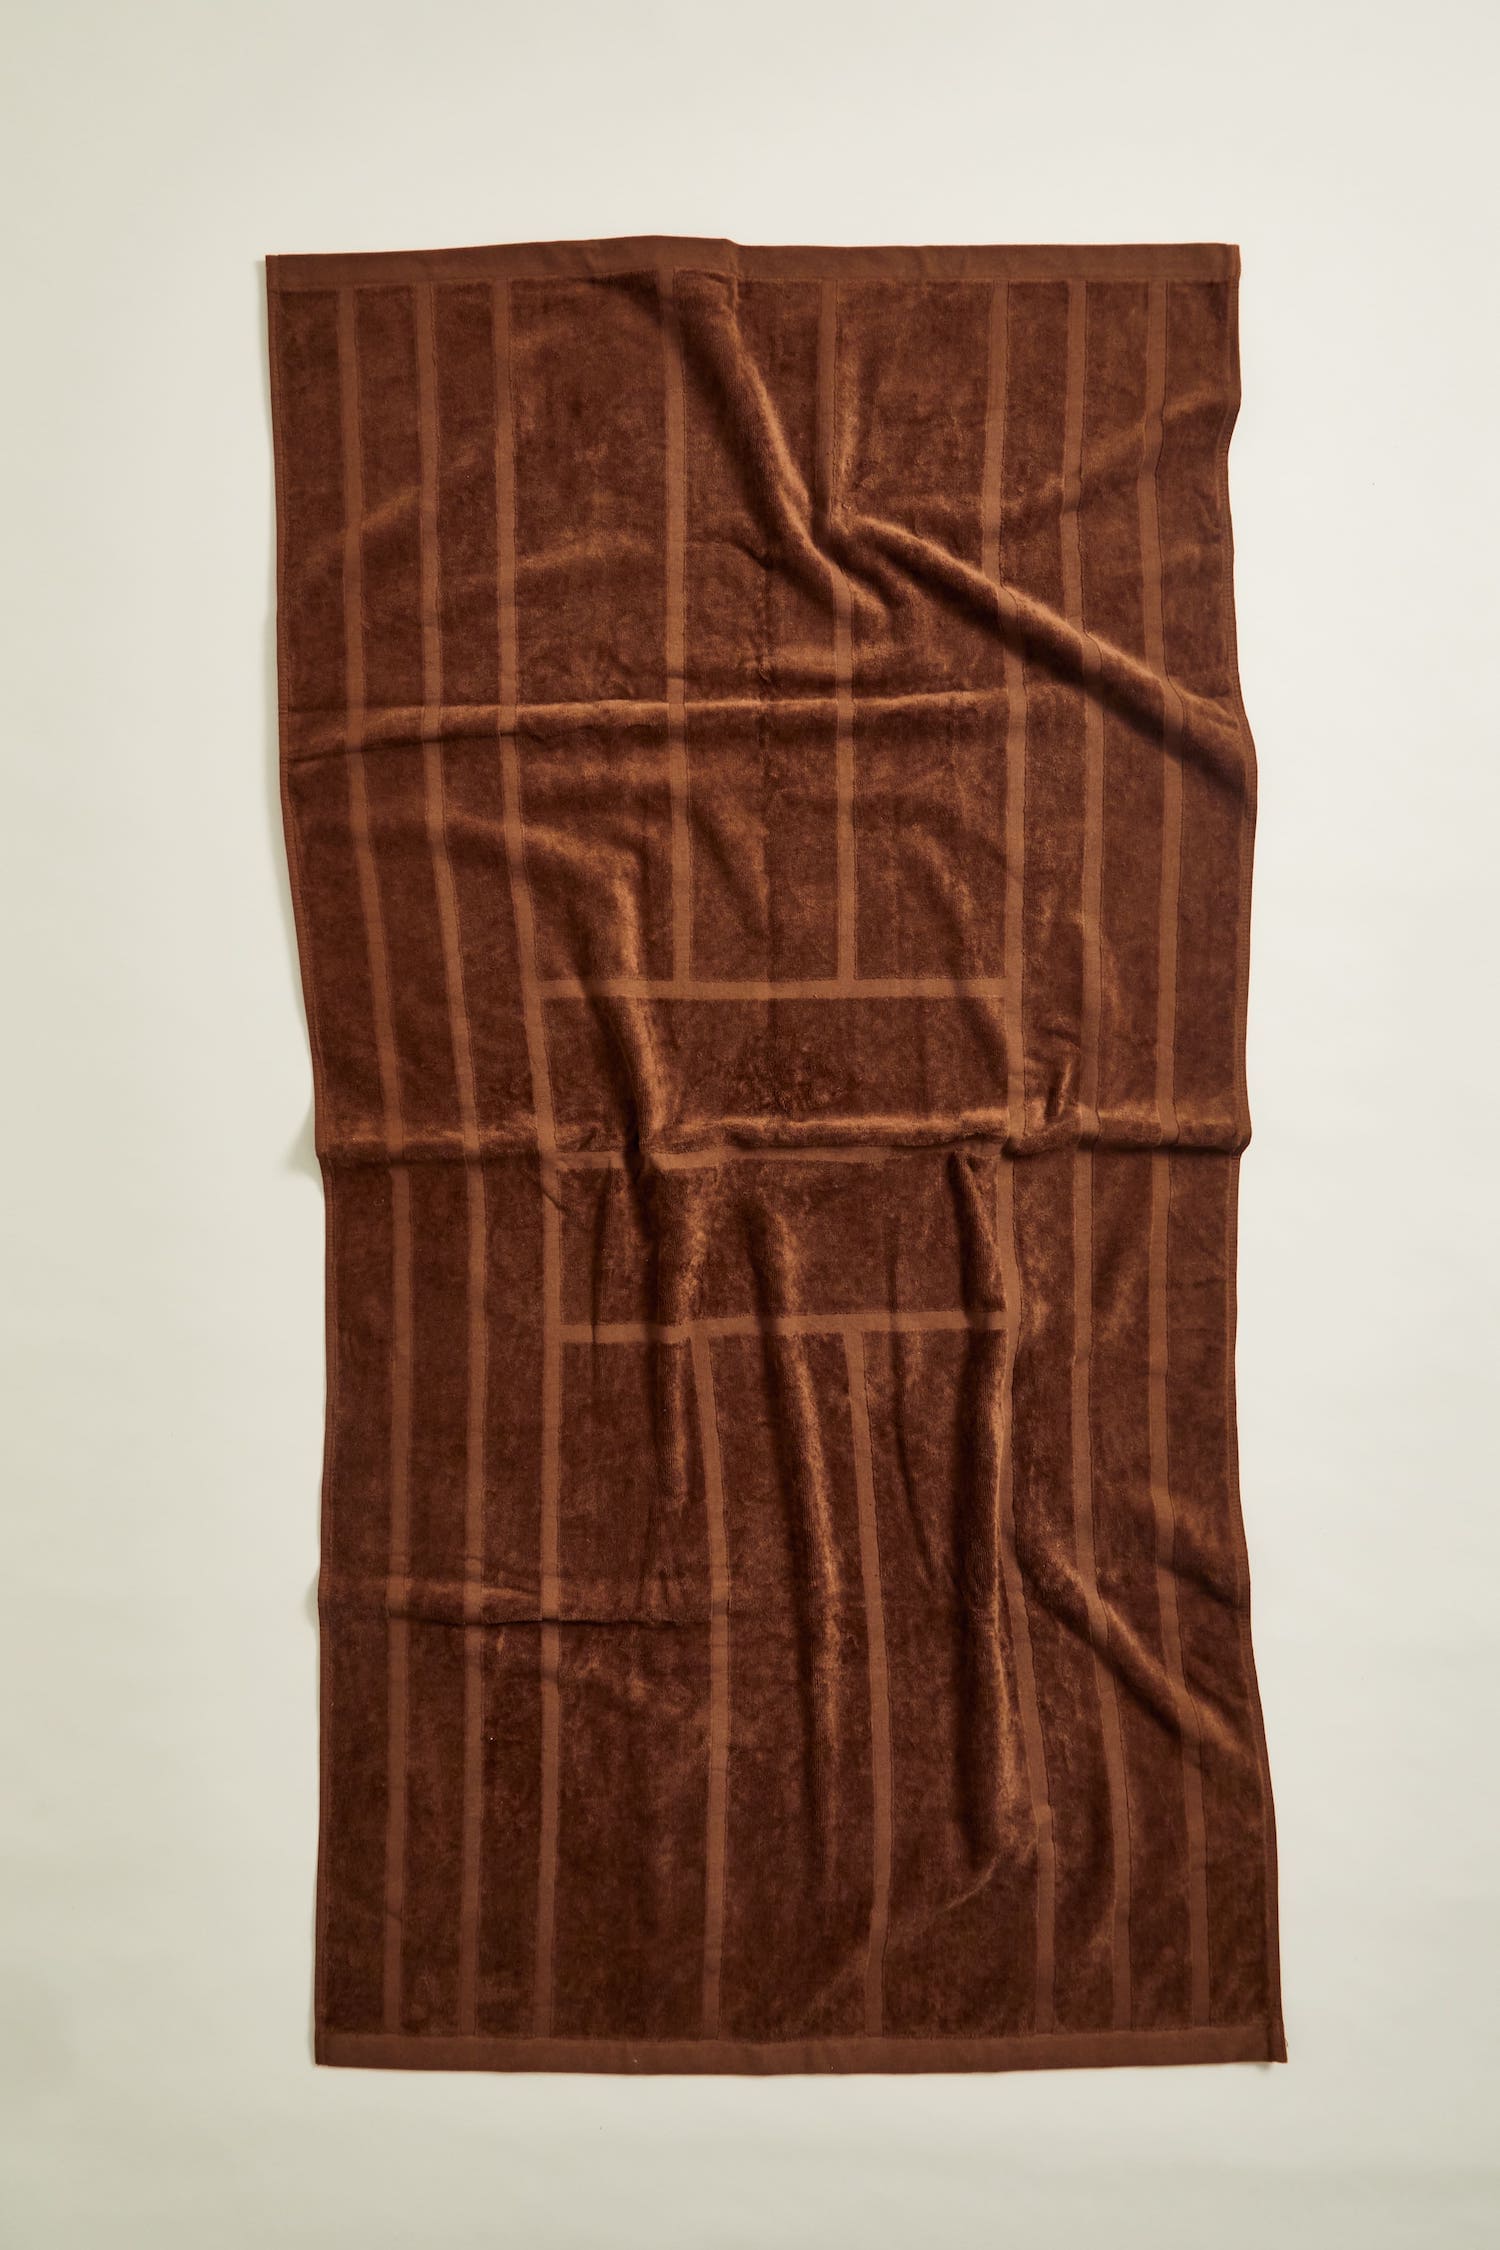 Woodford Organic Cotton Pool Towel in Tabac. An elevated, everyday bath, beach or poolside towel with a jacquard cut pile gate motif in brown with a luxuriously soft, 100% organic cotton hand.